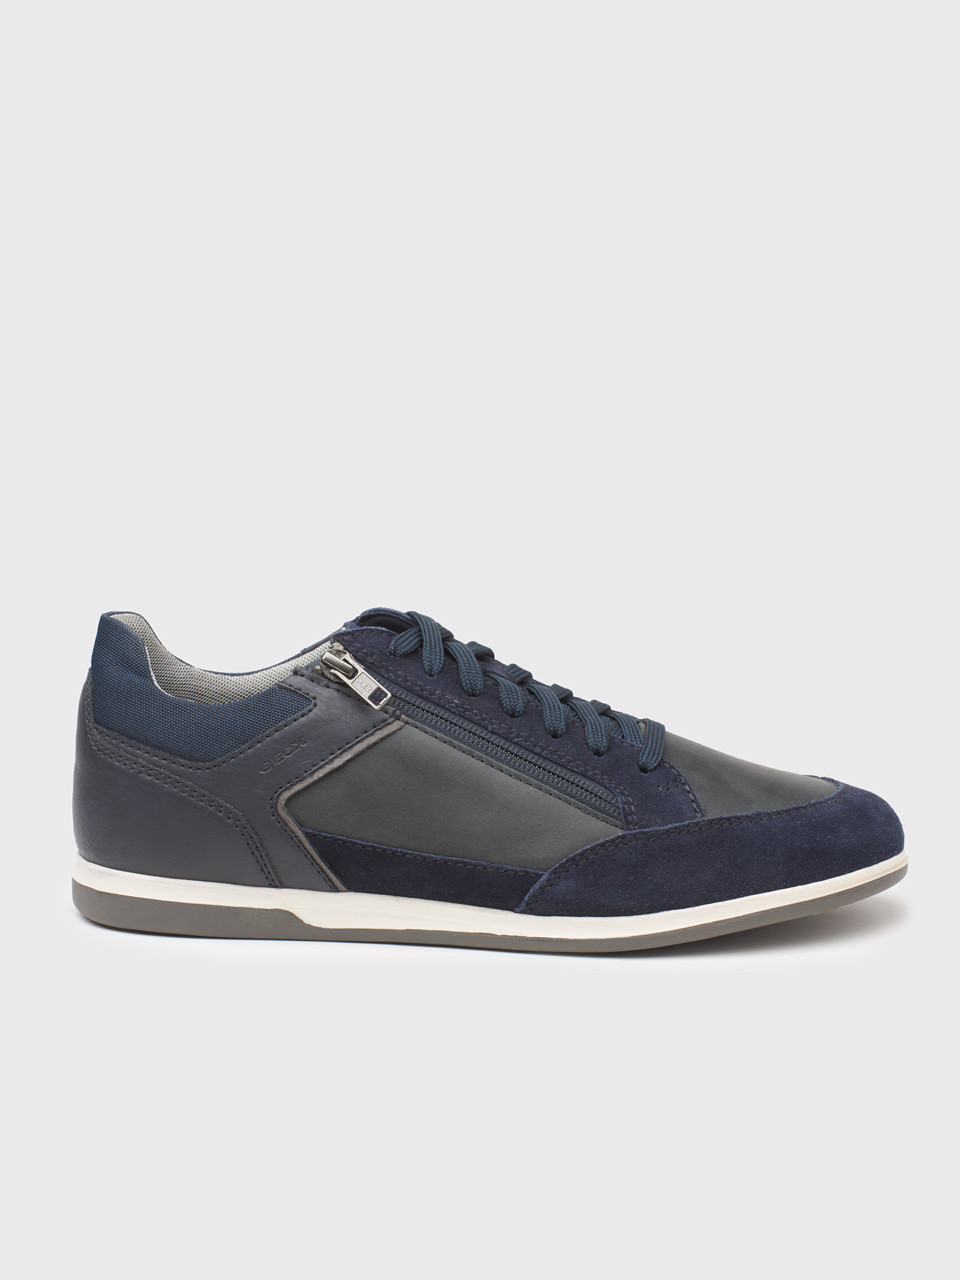 Men's Geox Waxed Leather & Suede Trainer | Peter Christian